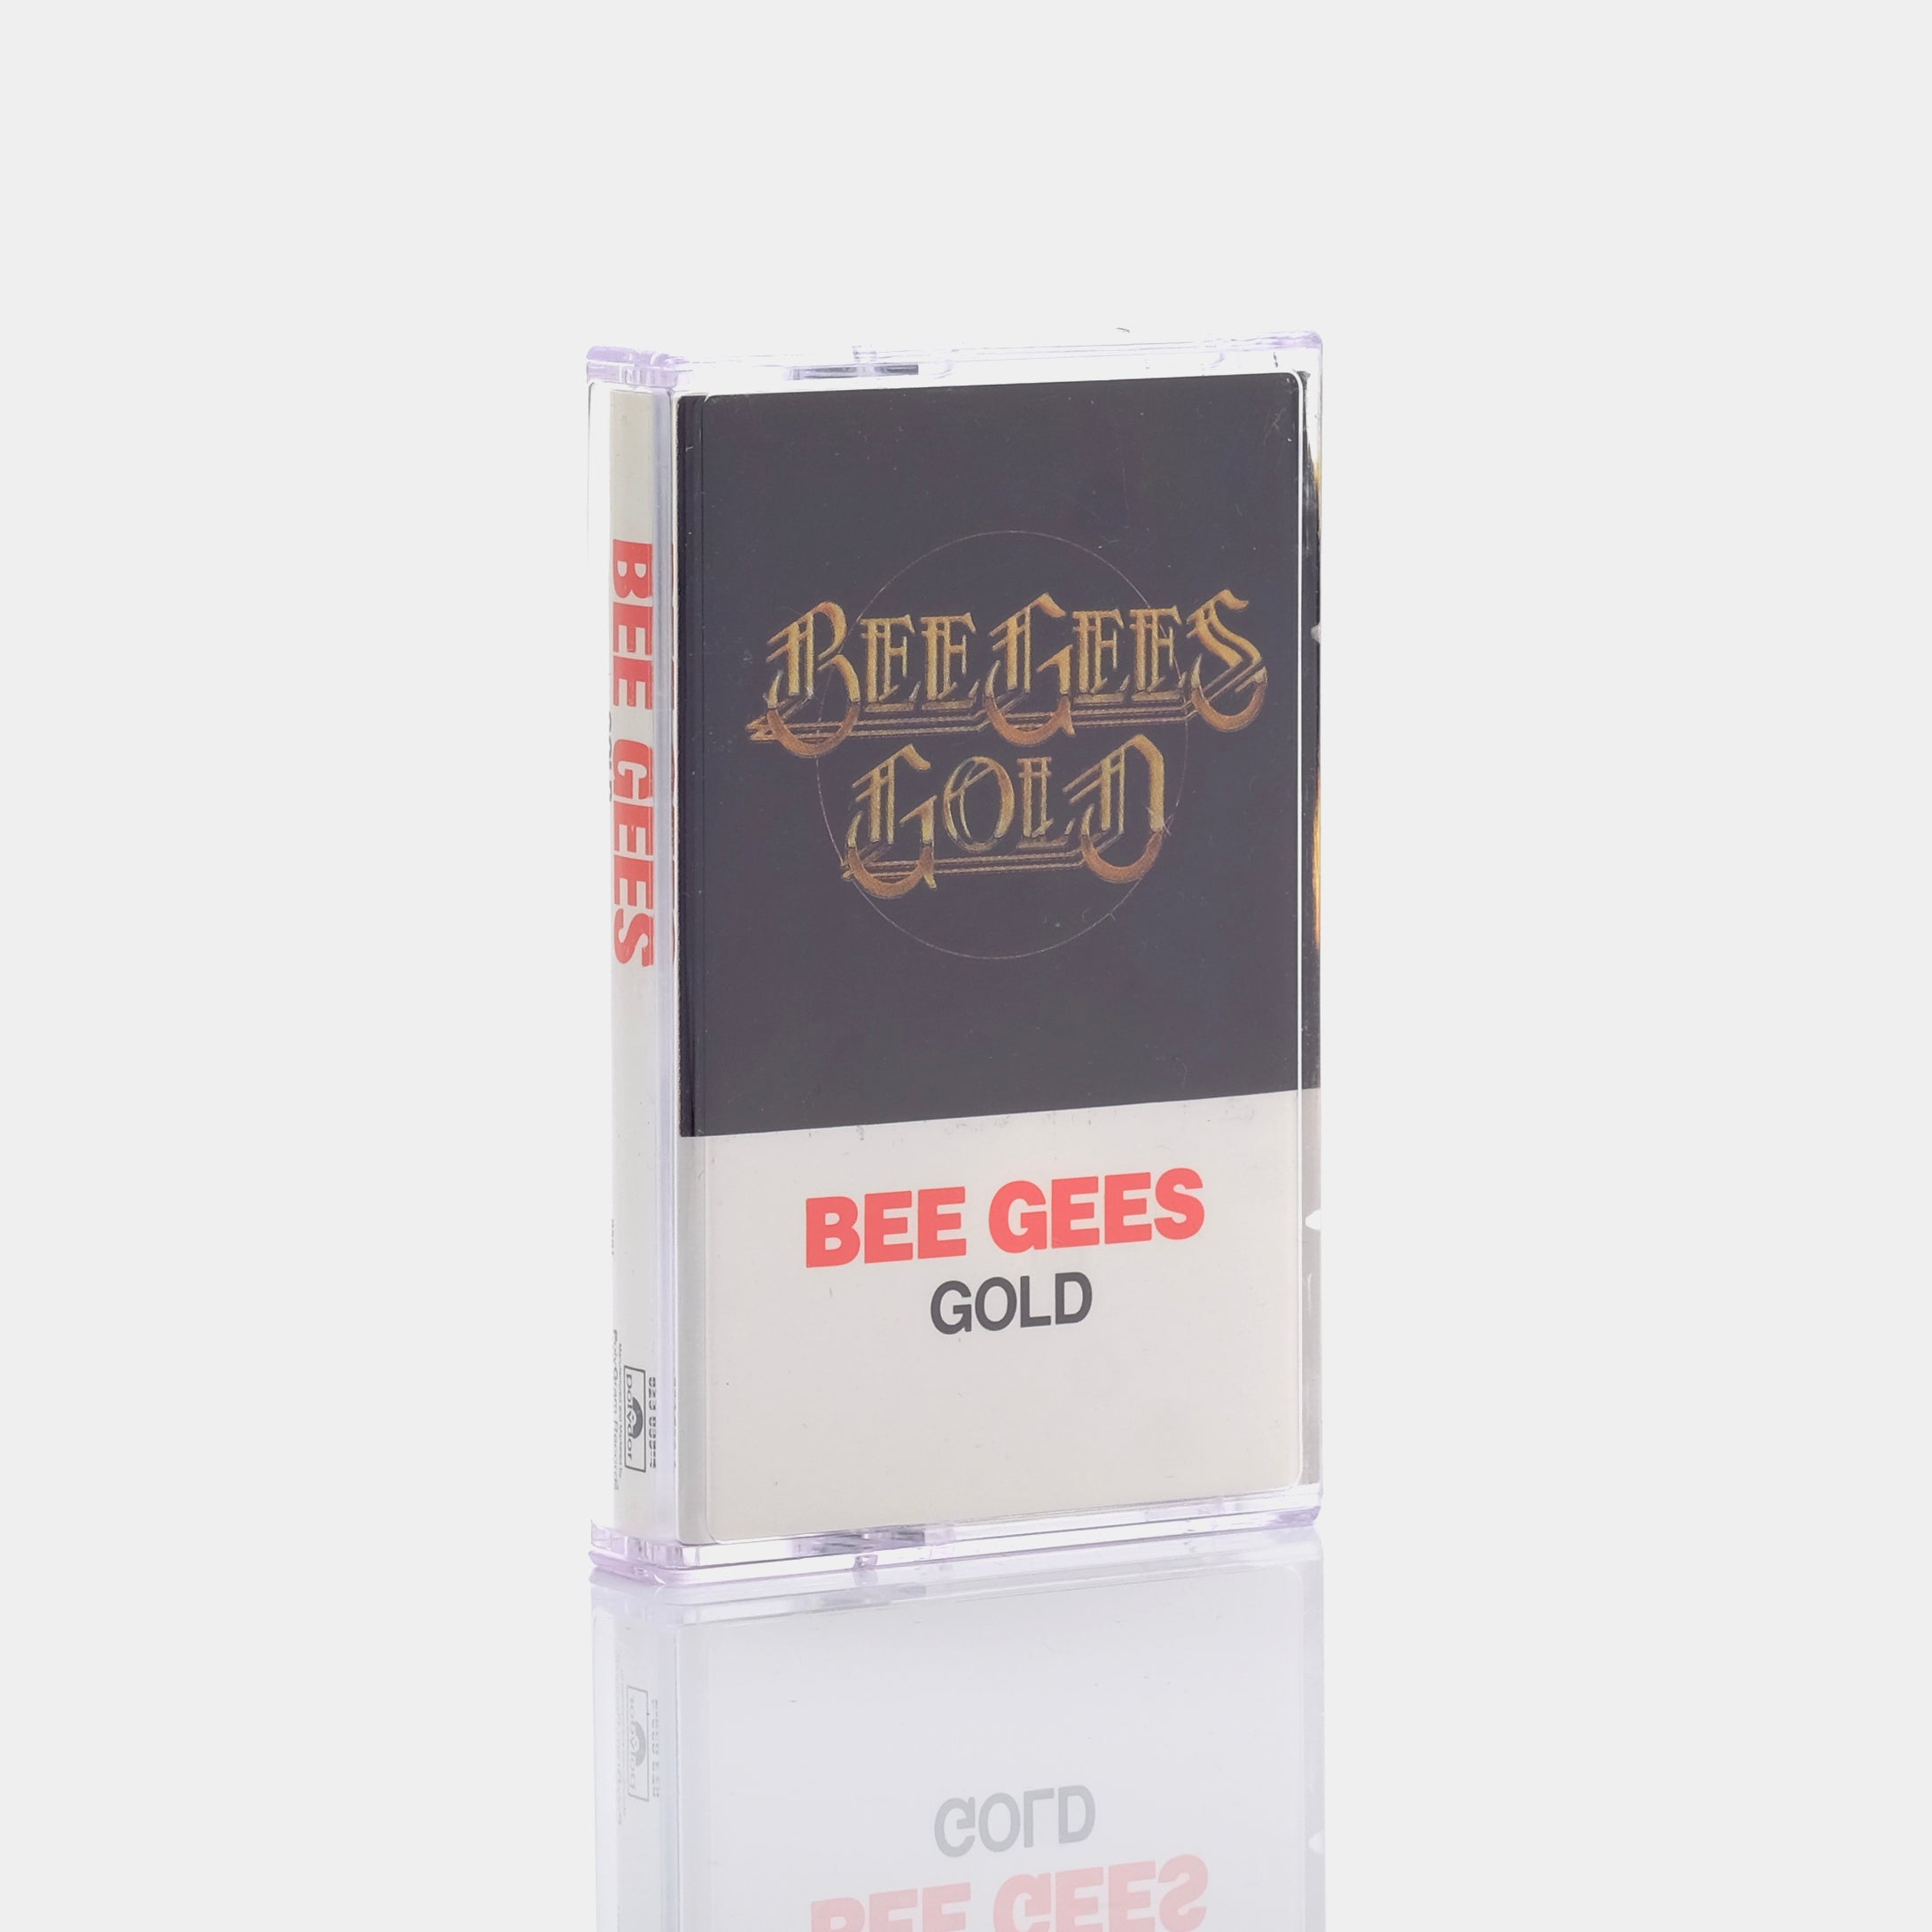 Bee Gees - Gold Cassette Tape